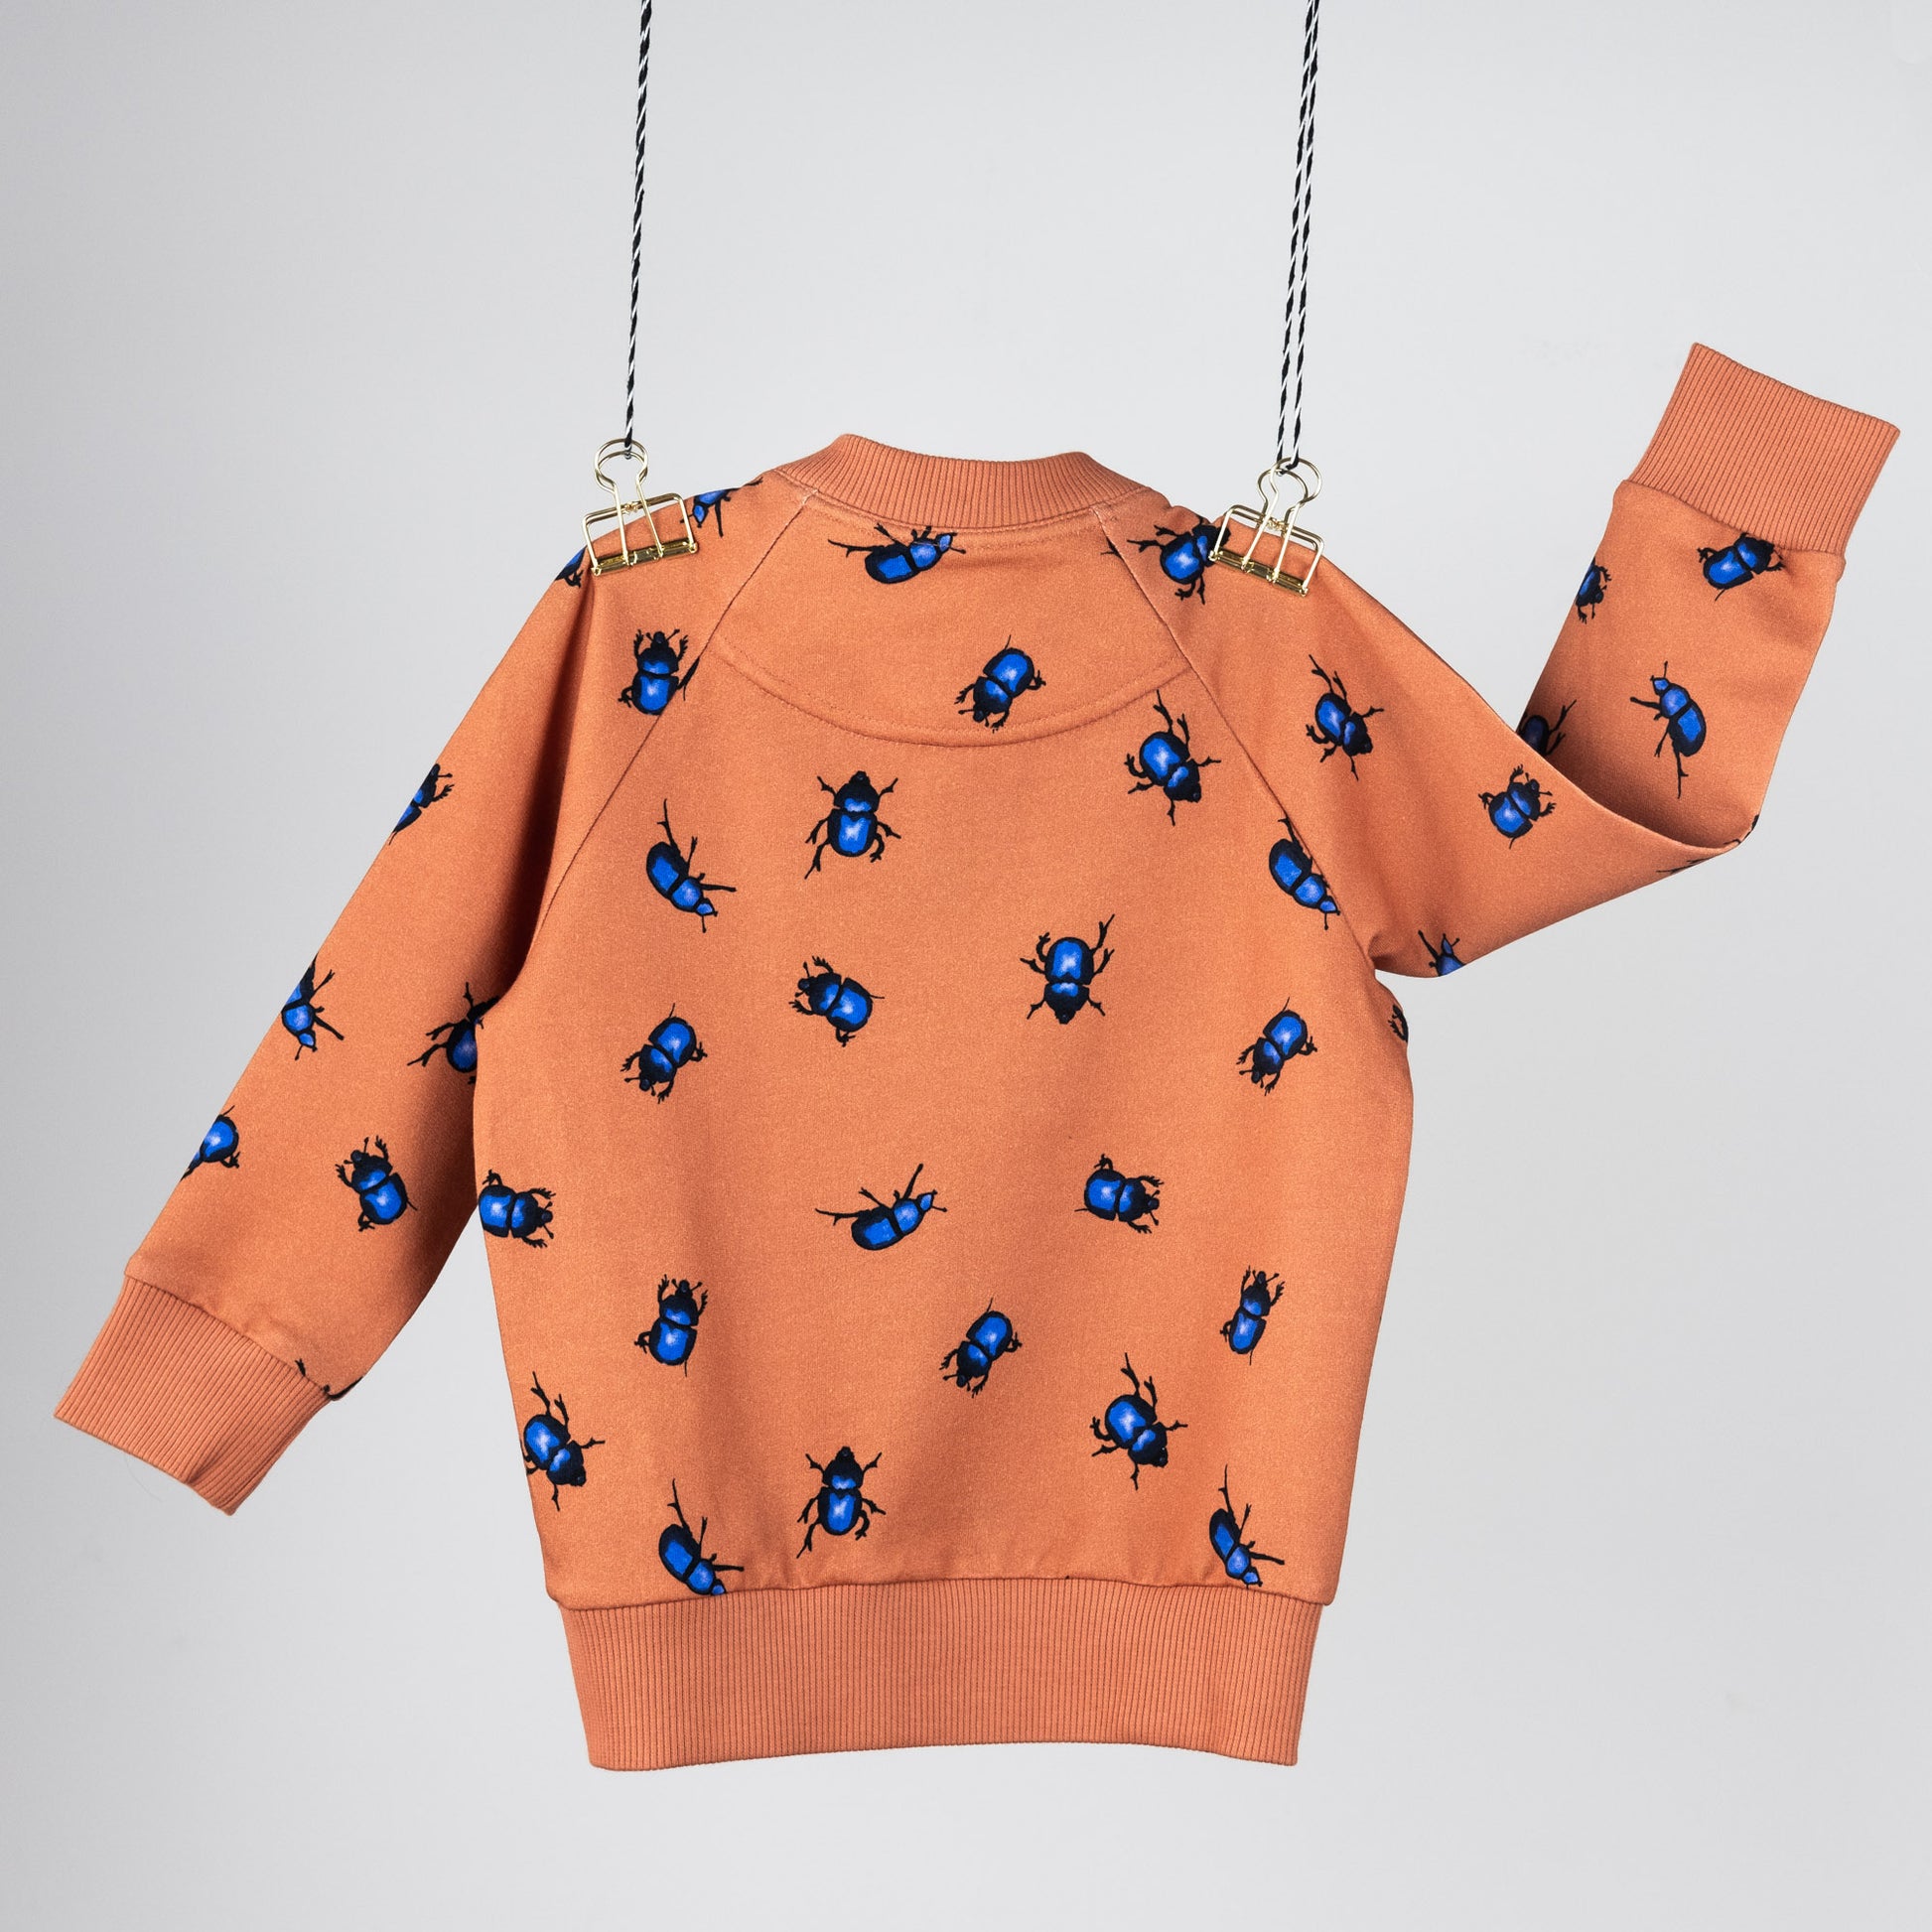 Back view of the bomber jacket. Hanging in front of a light gray background. The jacket is orange with blue beetles.